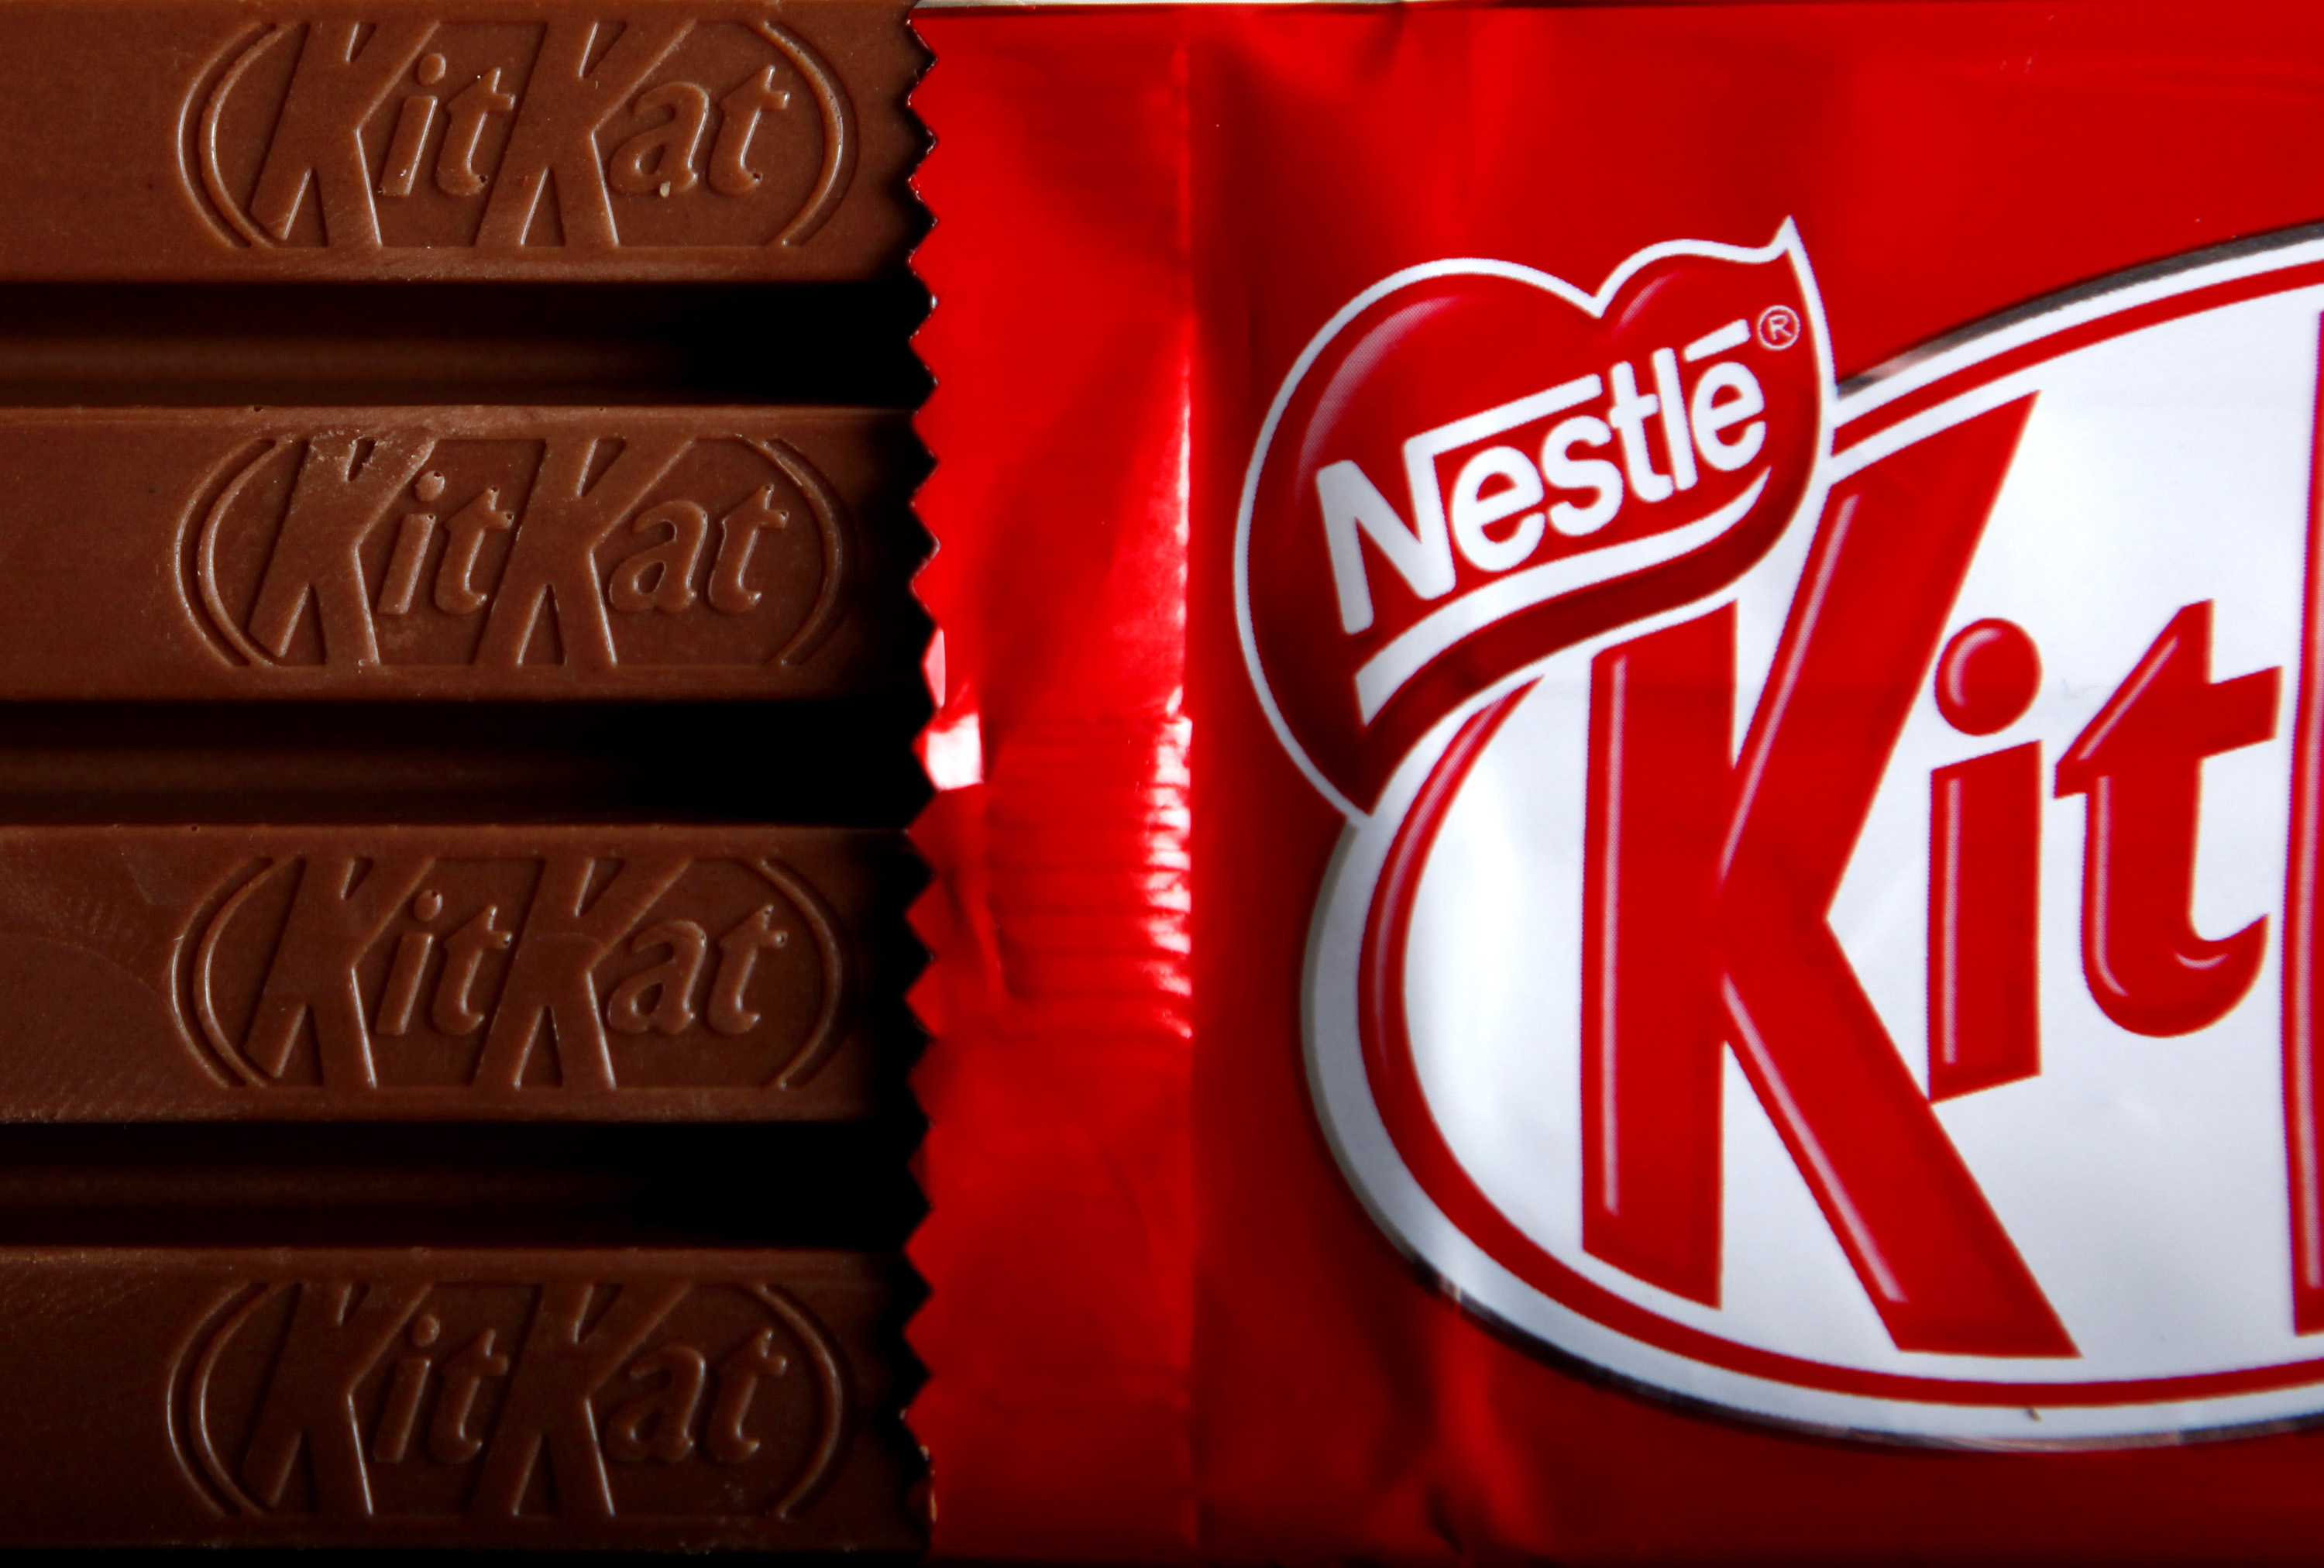 Bars of original KitKat chocolate, produced by Nestle SA, sit arranged for a photograph in London, U.K., on Monday, Dec.7, 2009. (Bloomberg—Bloomberg via Getty Images)